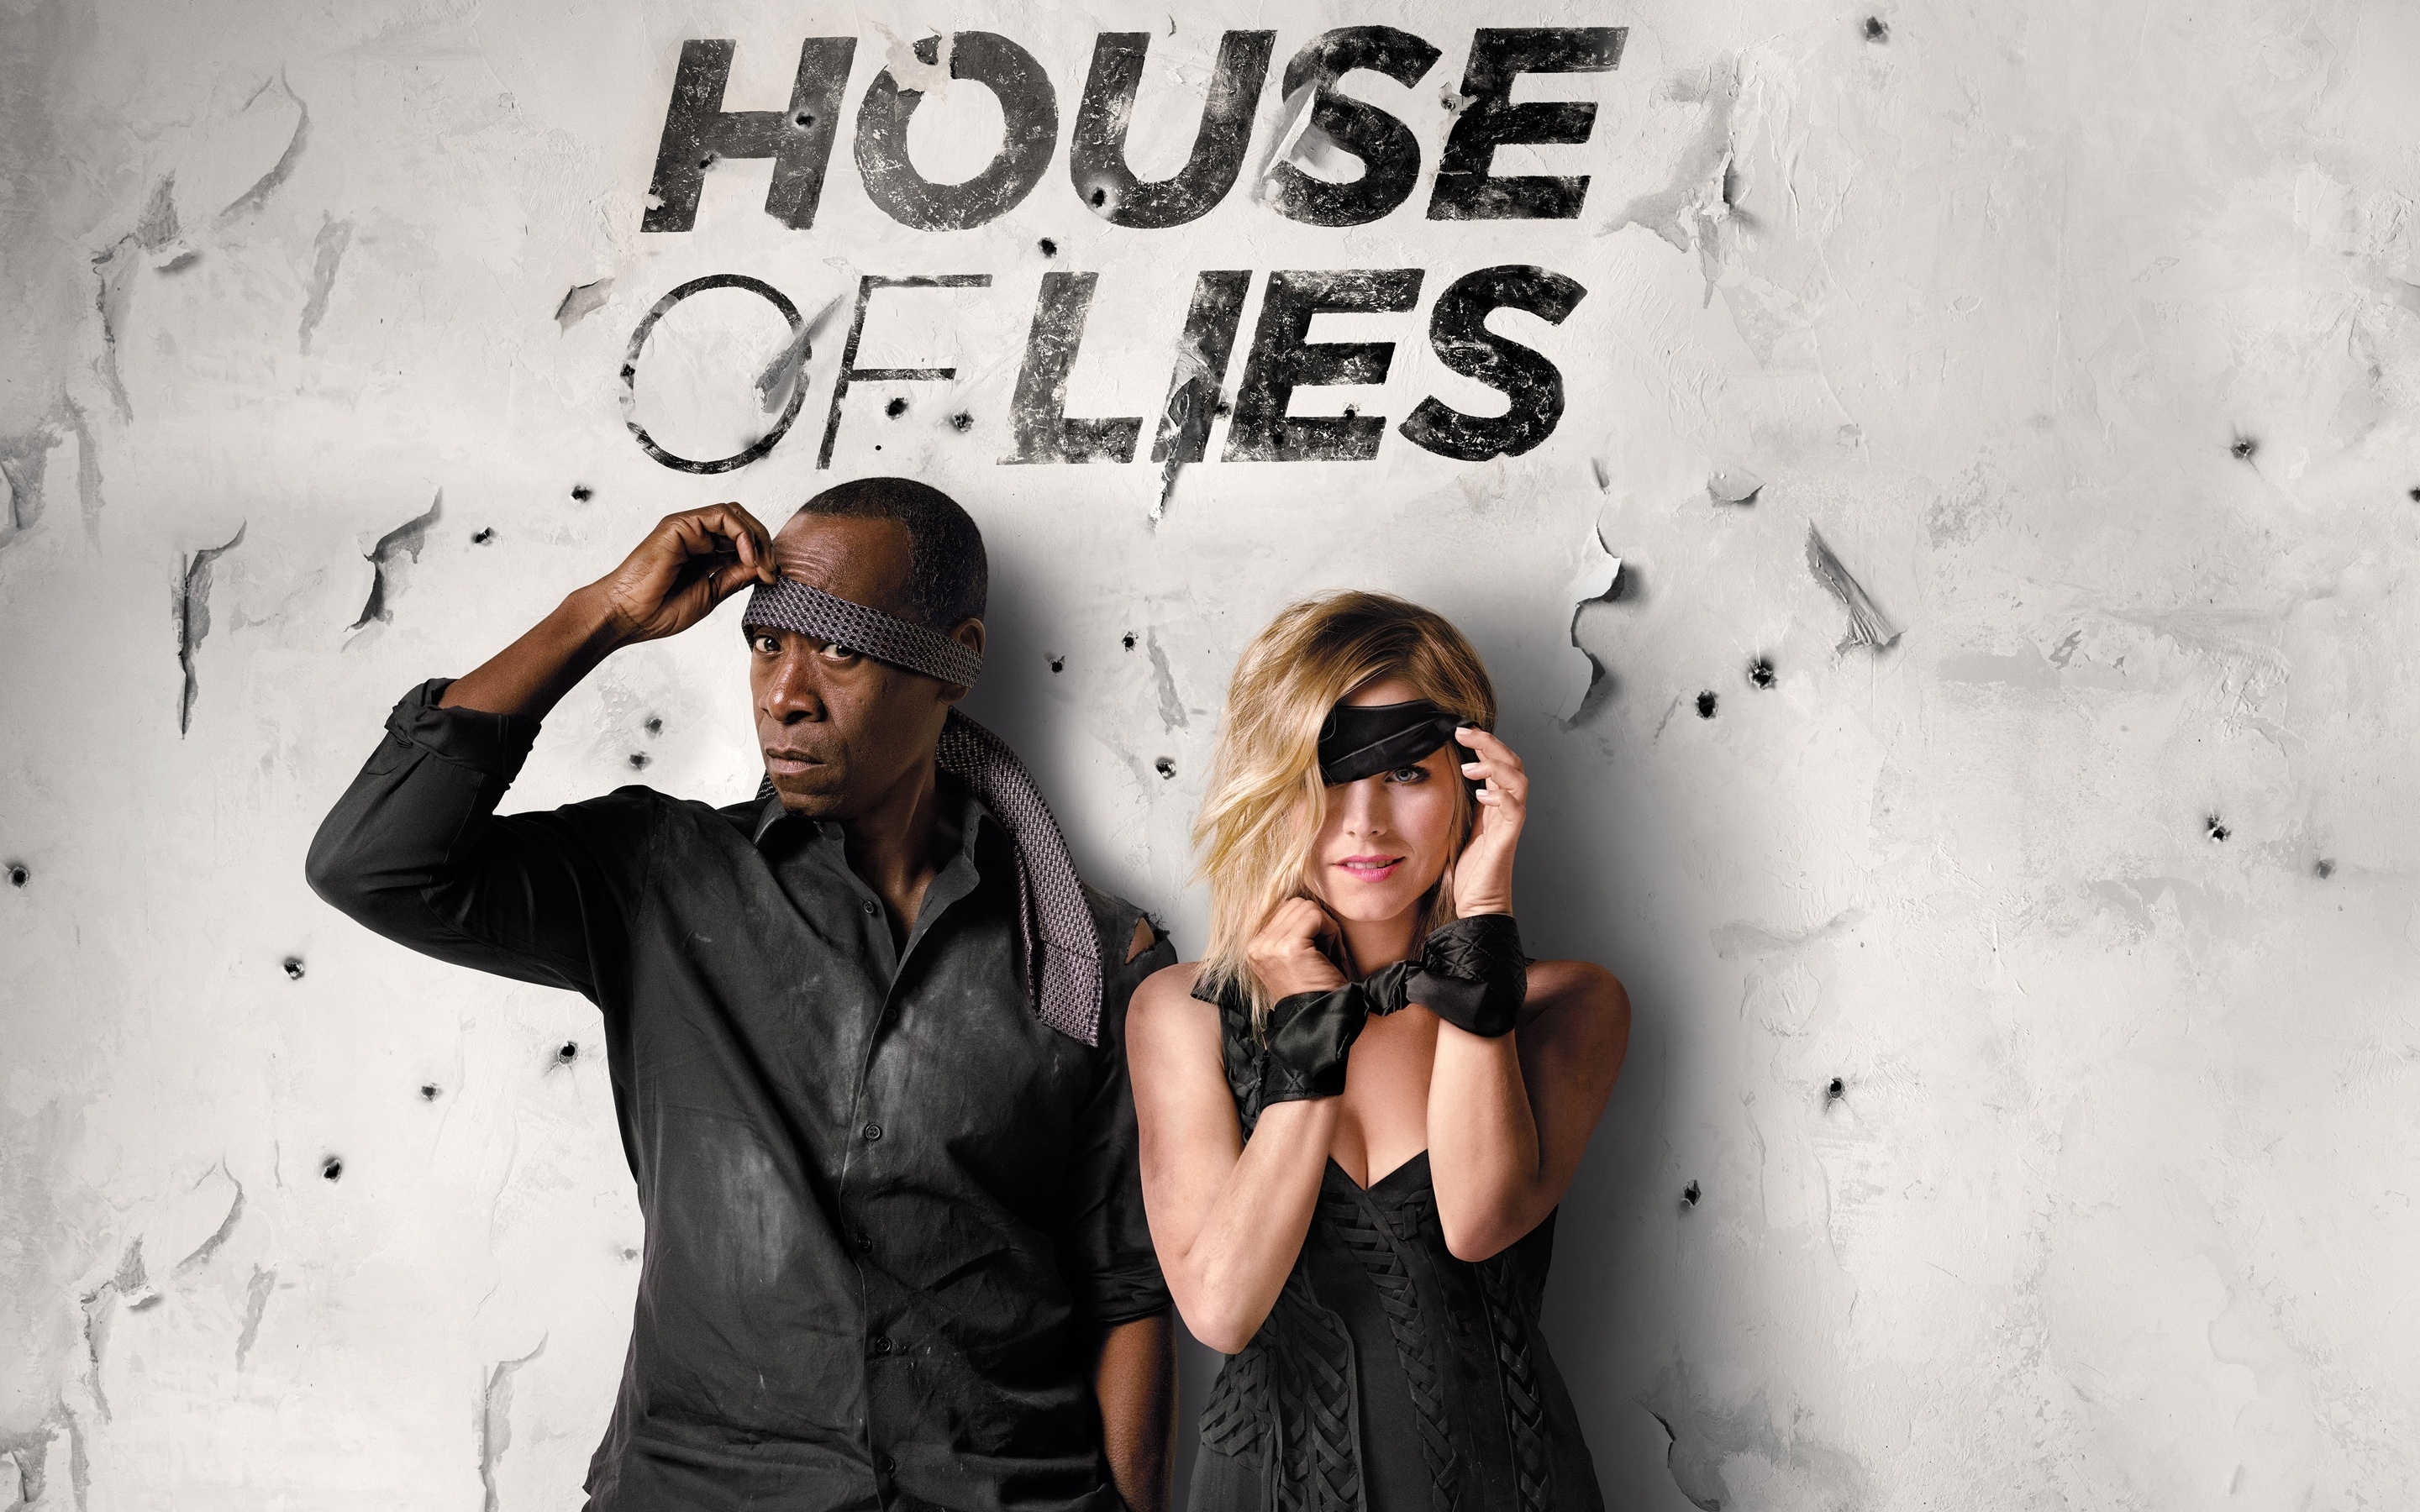 House of Lies for 2880 x 1800 Retina Display resolution